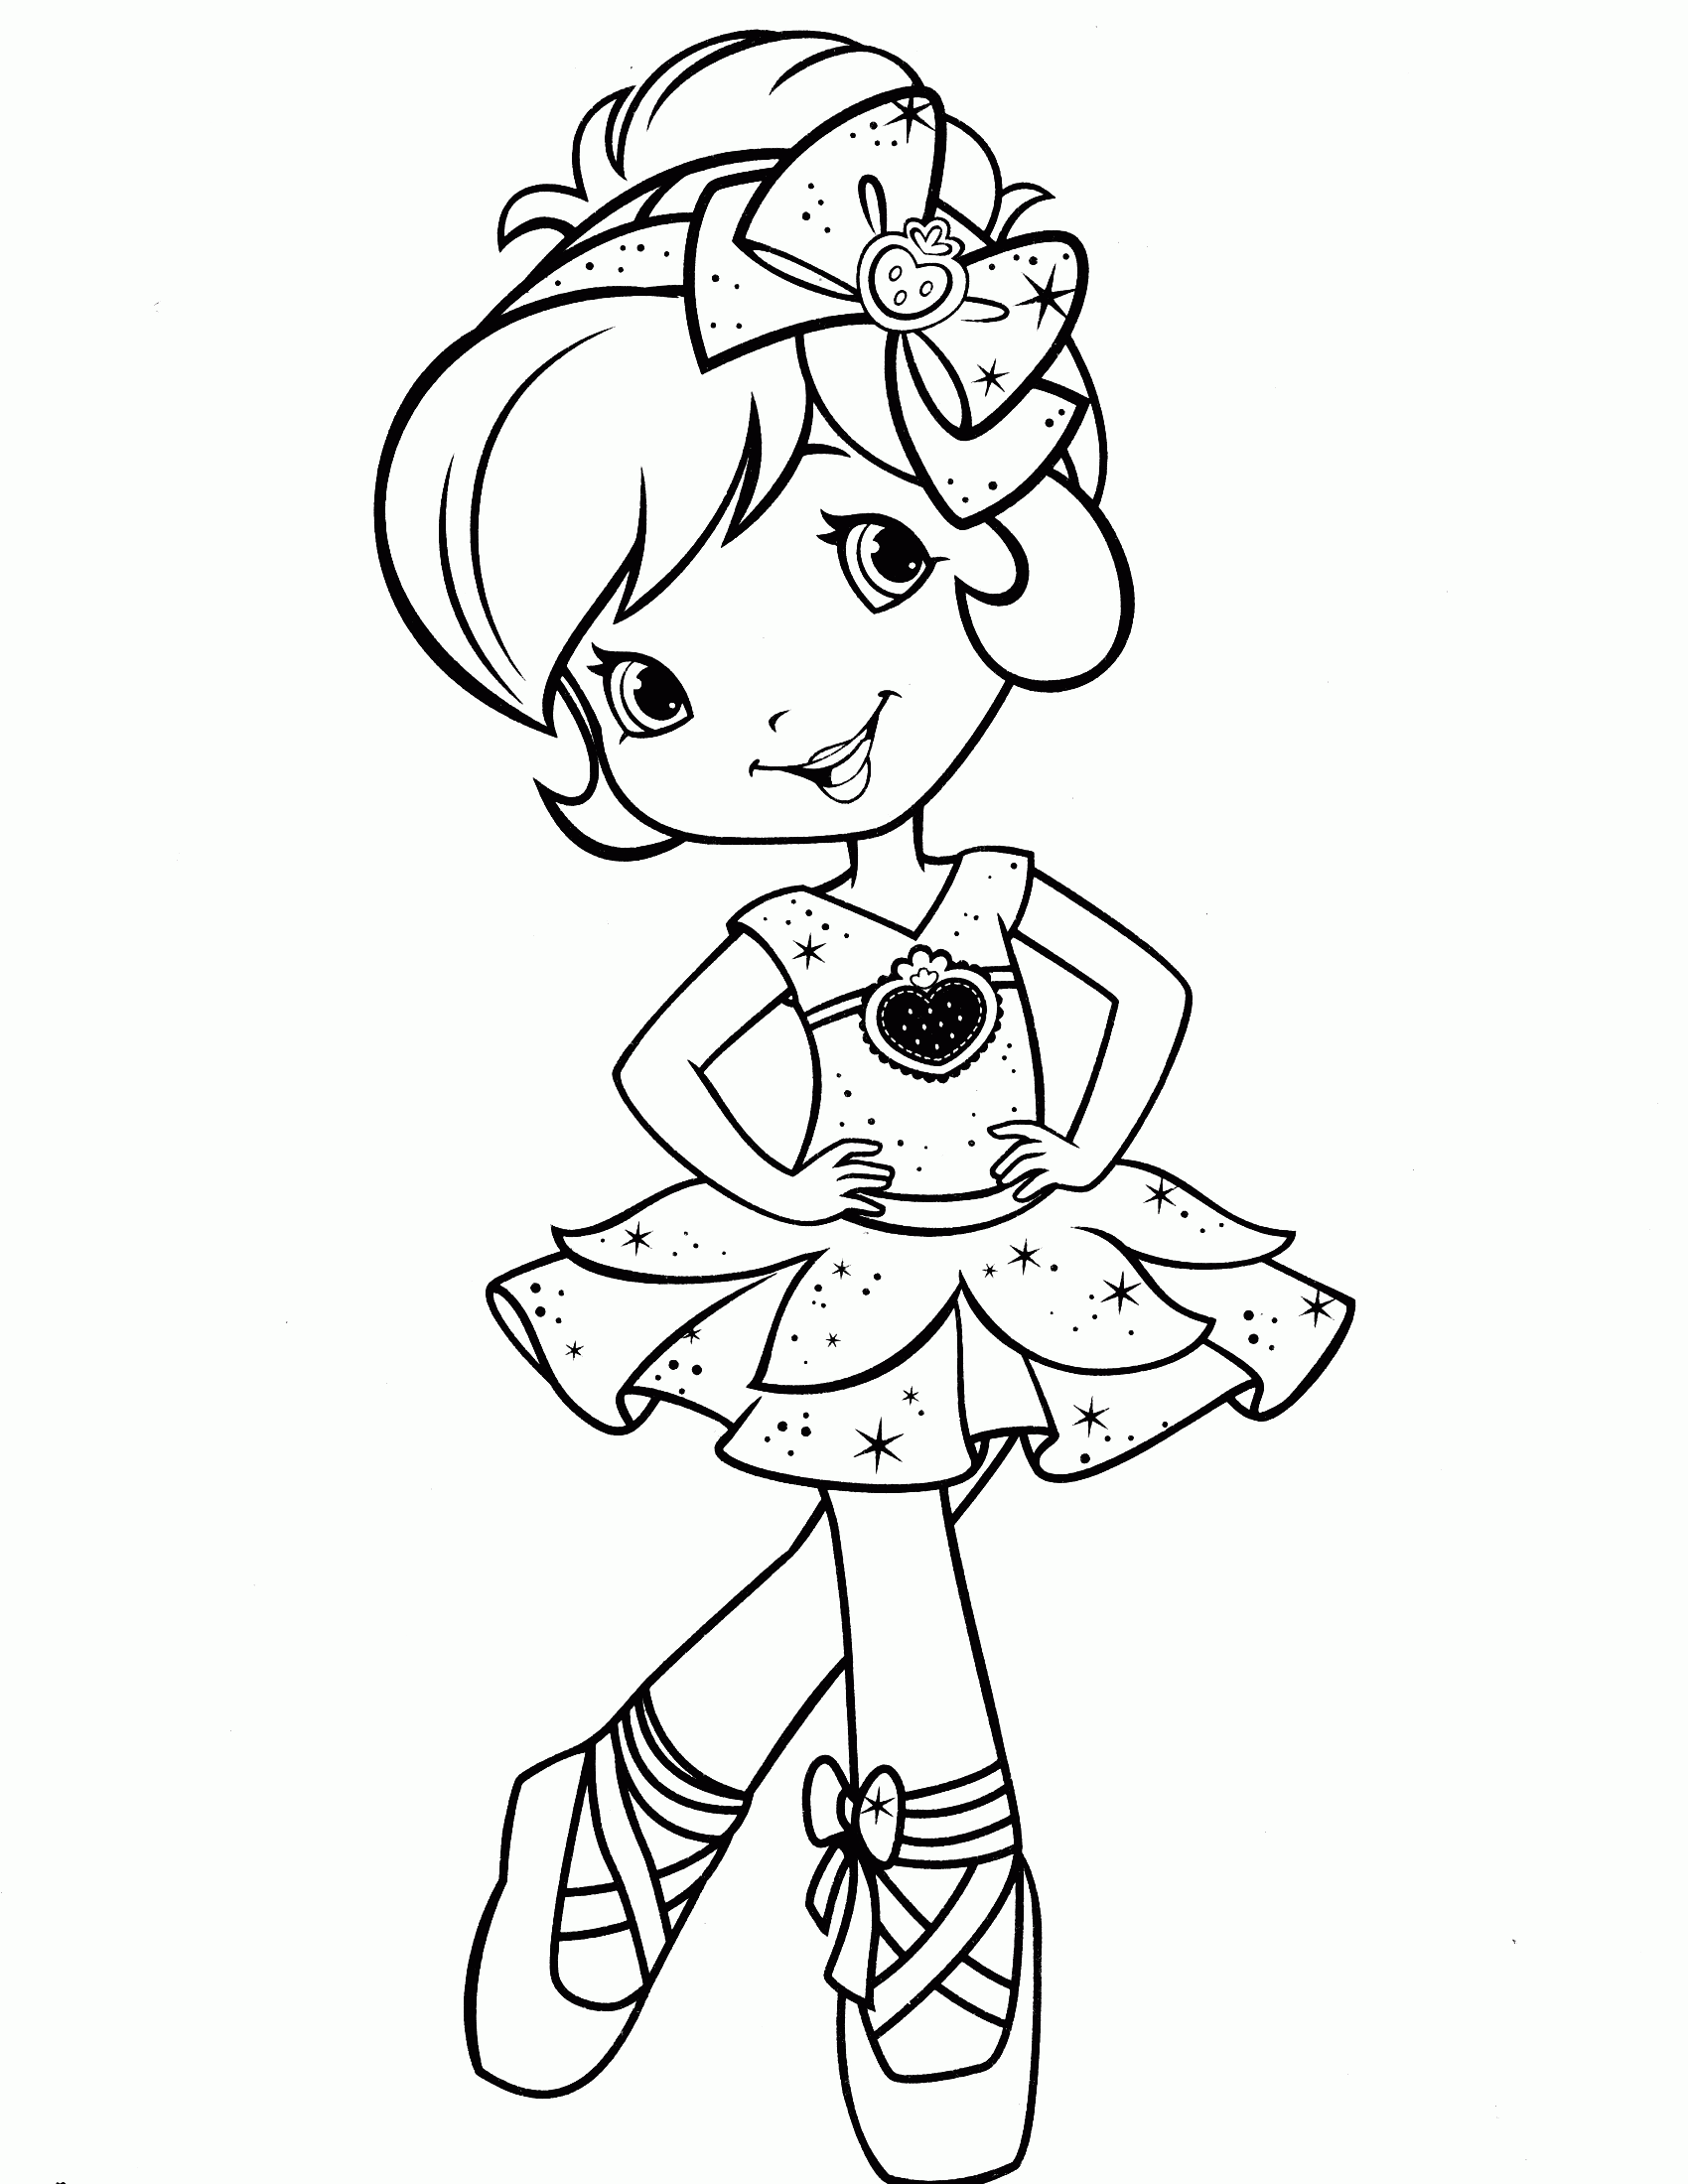 Strawberry Shortcake Colouring Pages Free - High Quality Coloring ...